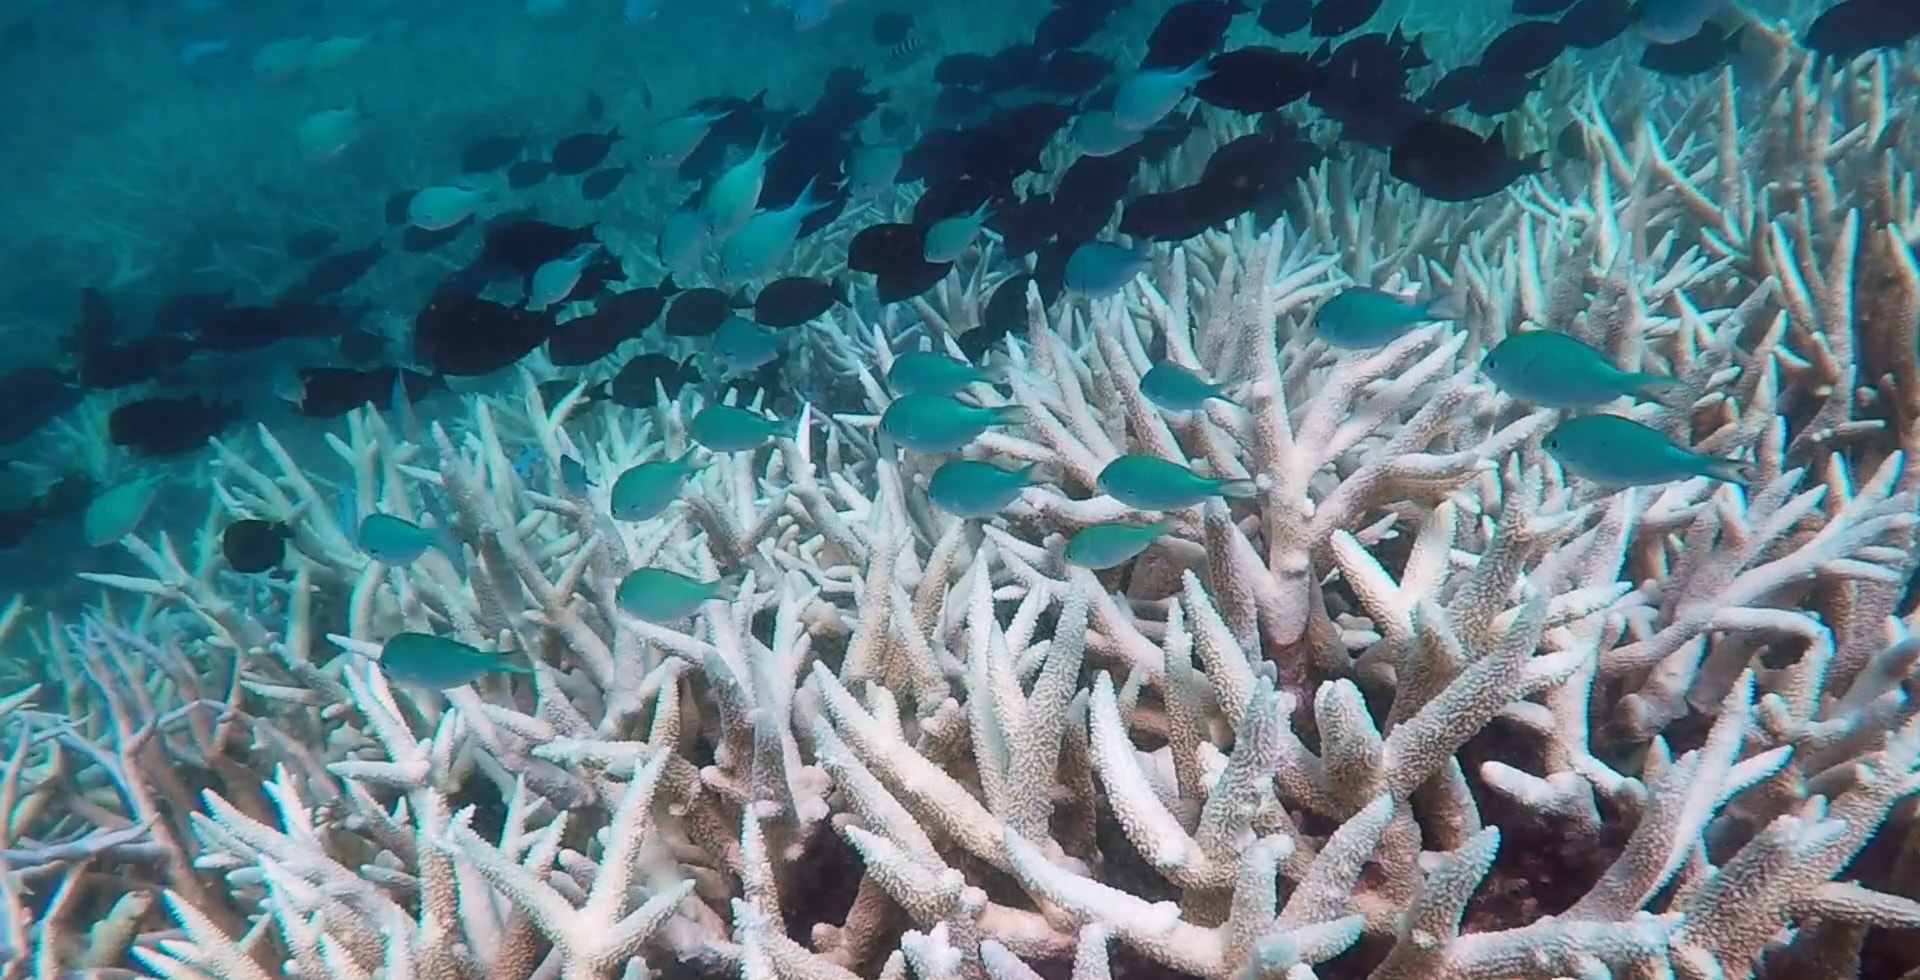 These artificial reefs are combating coral degradation